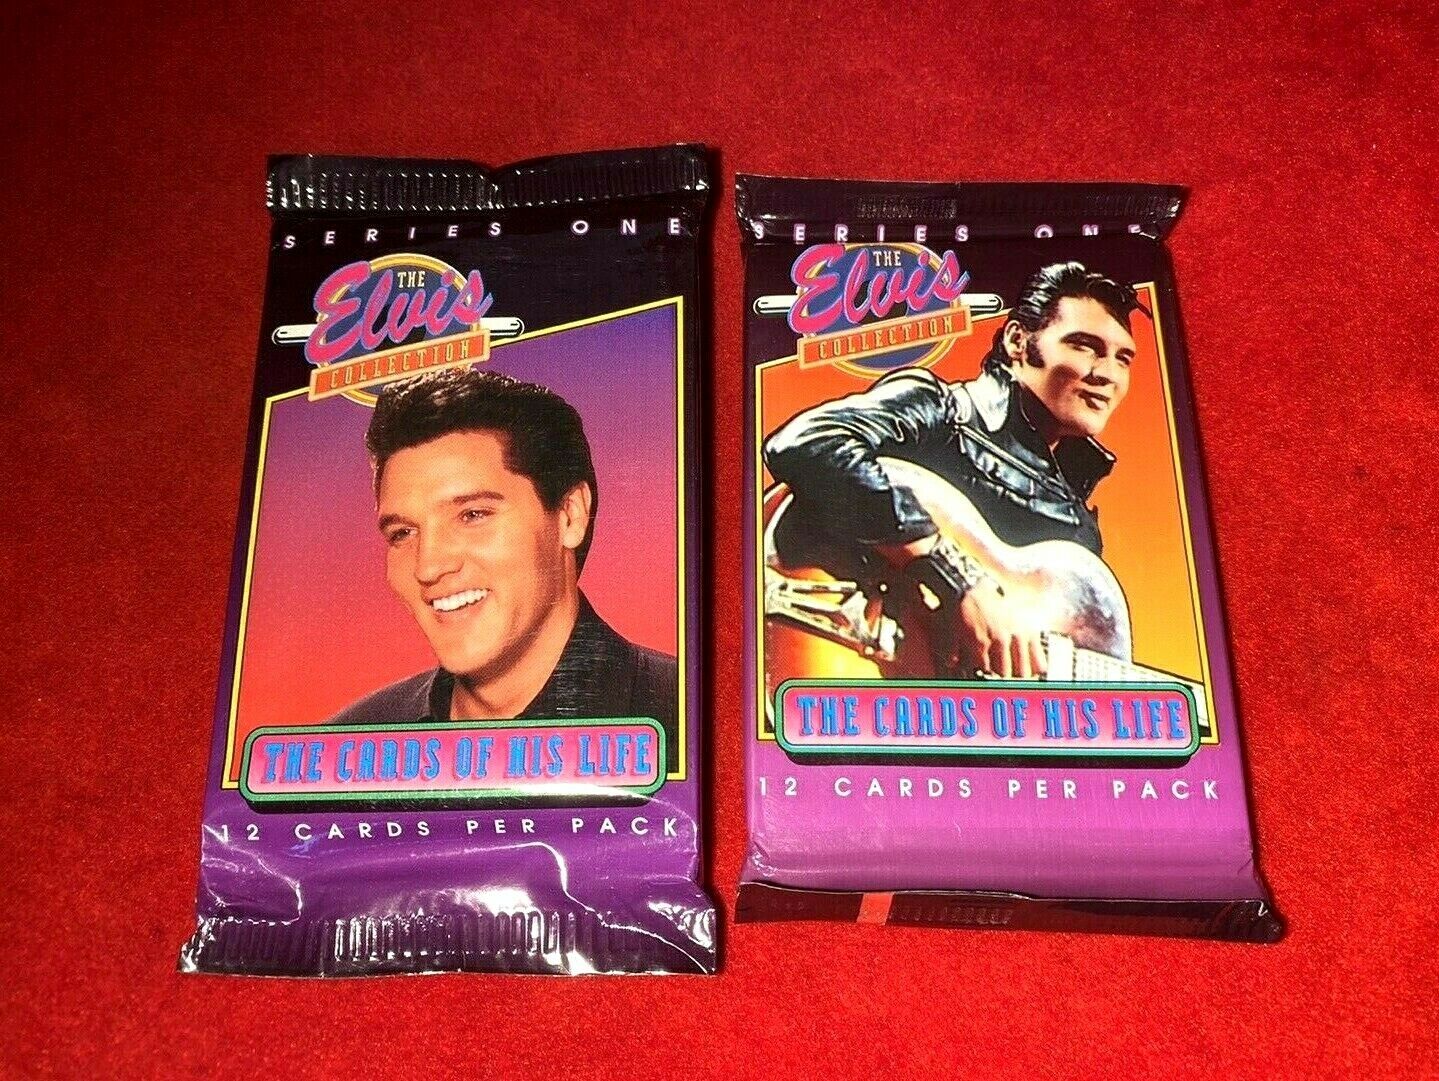 Rare Elvis Presley " The Cards Of His Life " Series 1 - Sealed Trading Cards